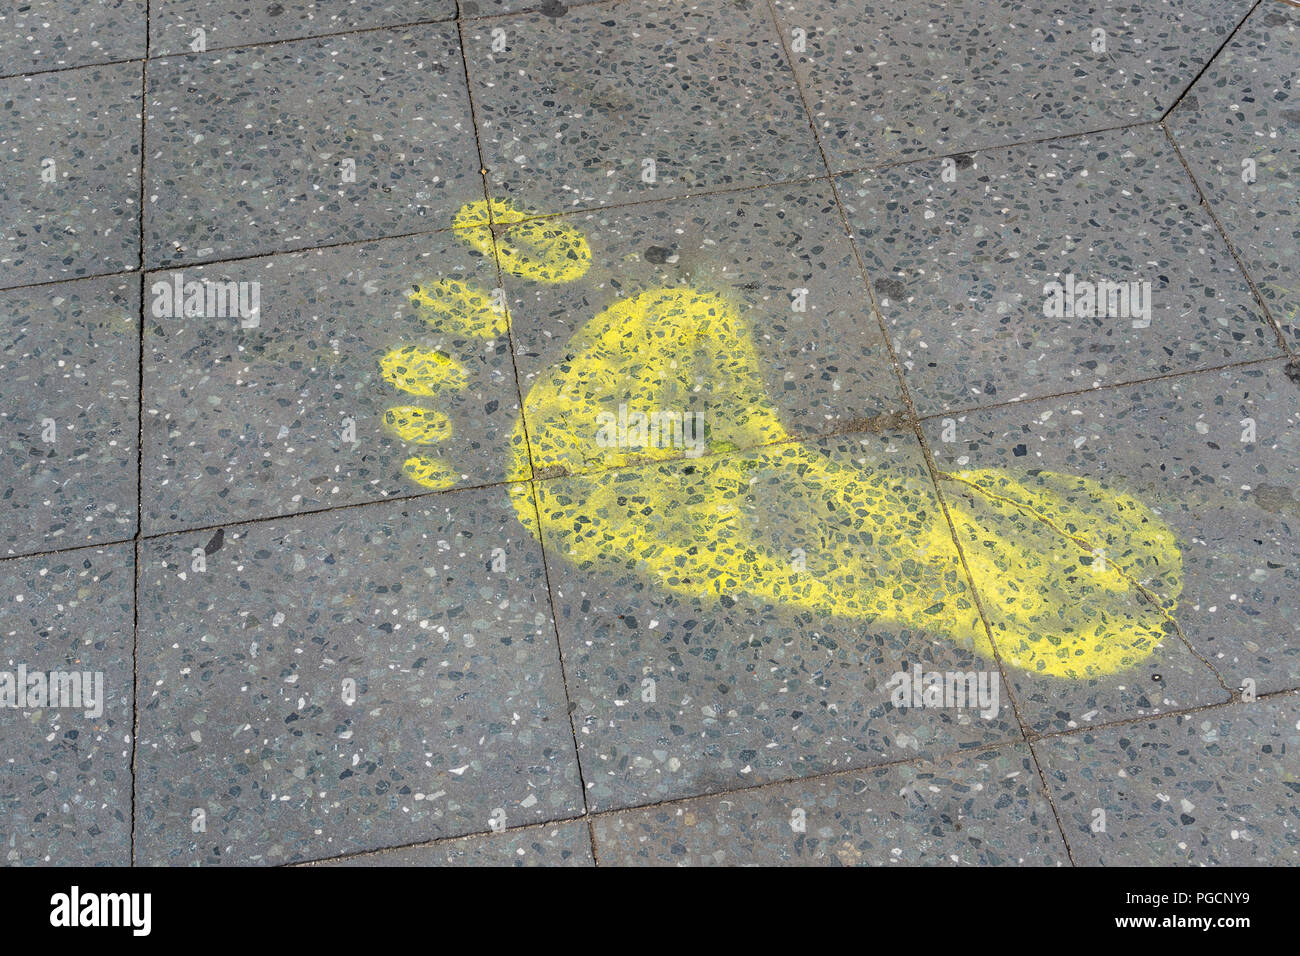 Berlin, Germany, July 14, 2018: Graphical Representation of Footprint on Tiled Flooring Stock Photo